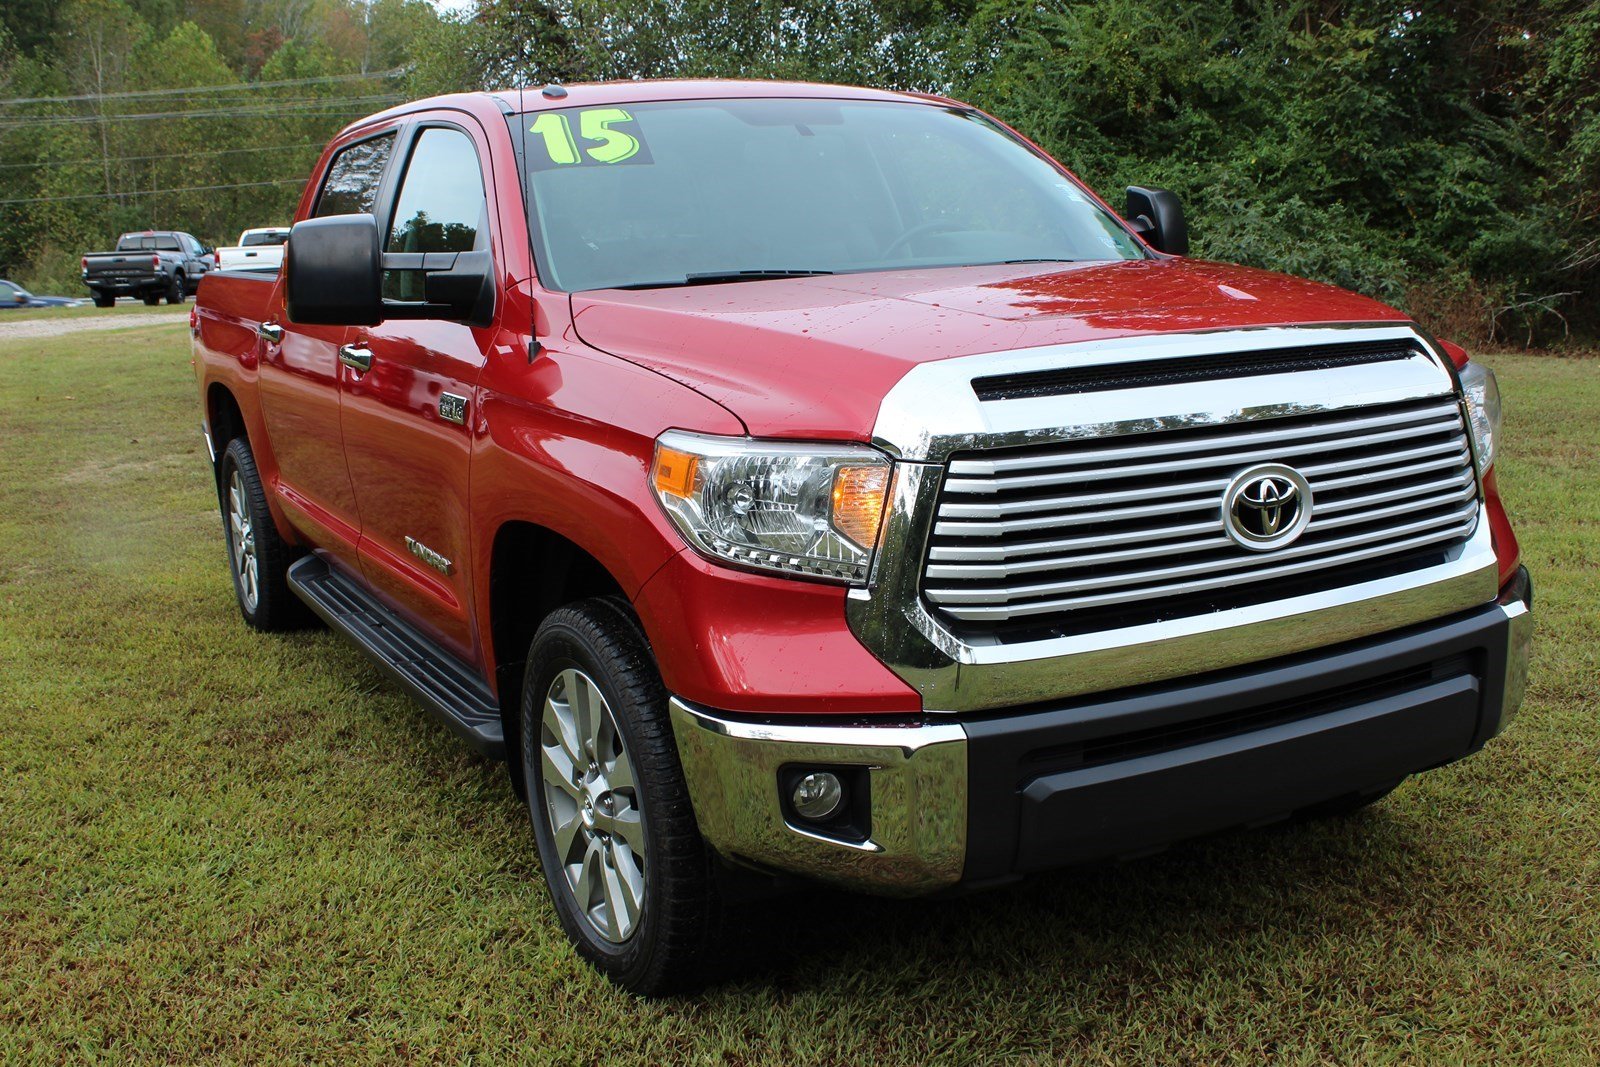 Pre-Owned 2015 Toyota Tundra 4WD Truck LTD Crew Cab Pickup in